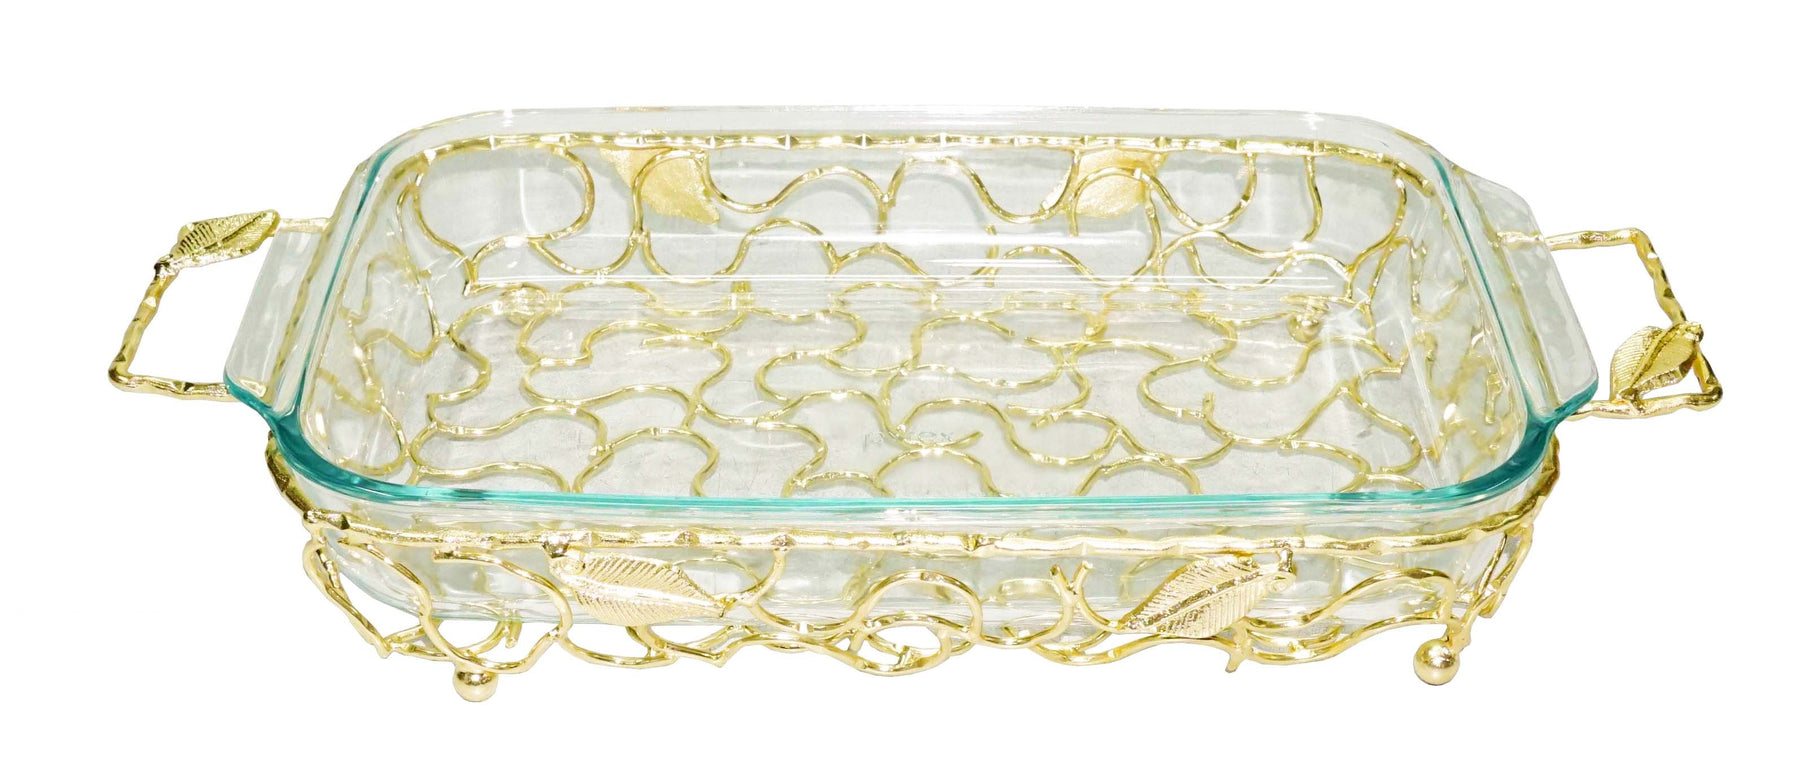 Classic Touch Rectangular Gold Handled Pyrex Holder with Leaf Design